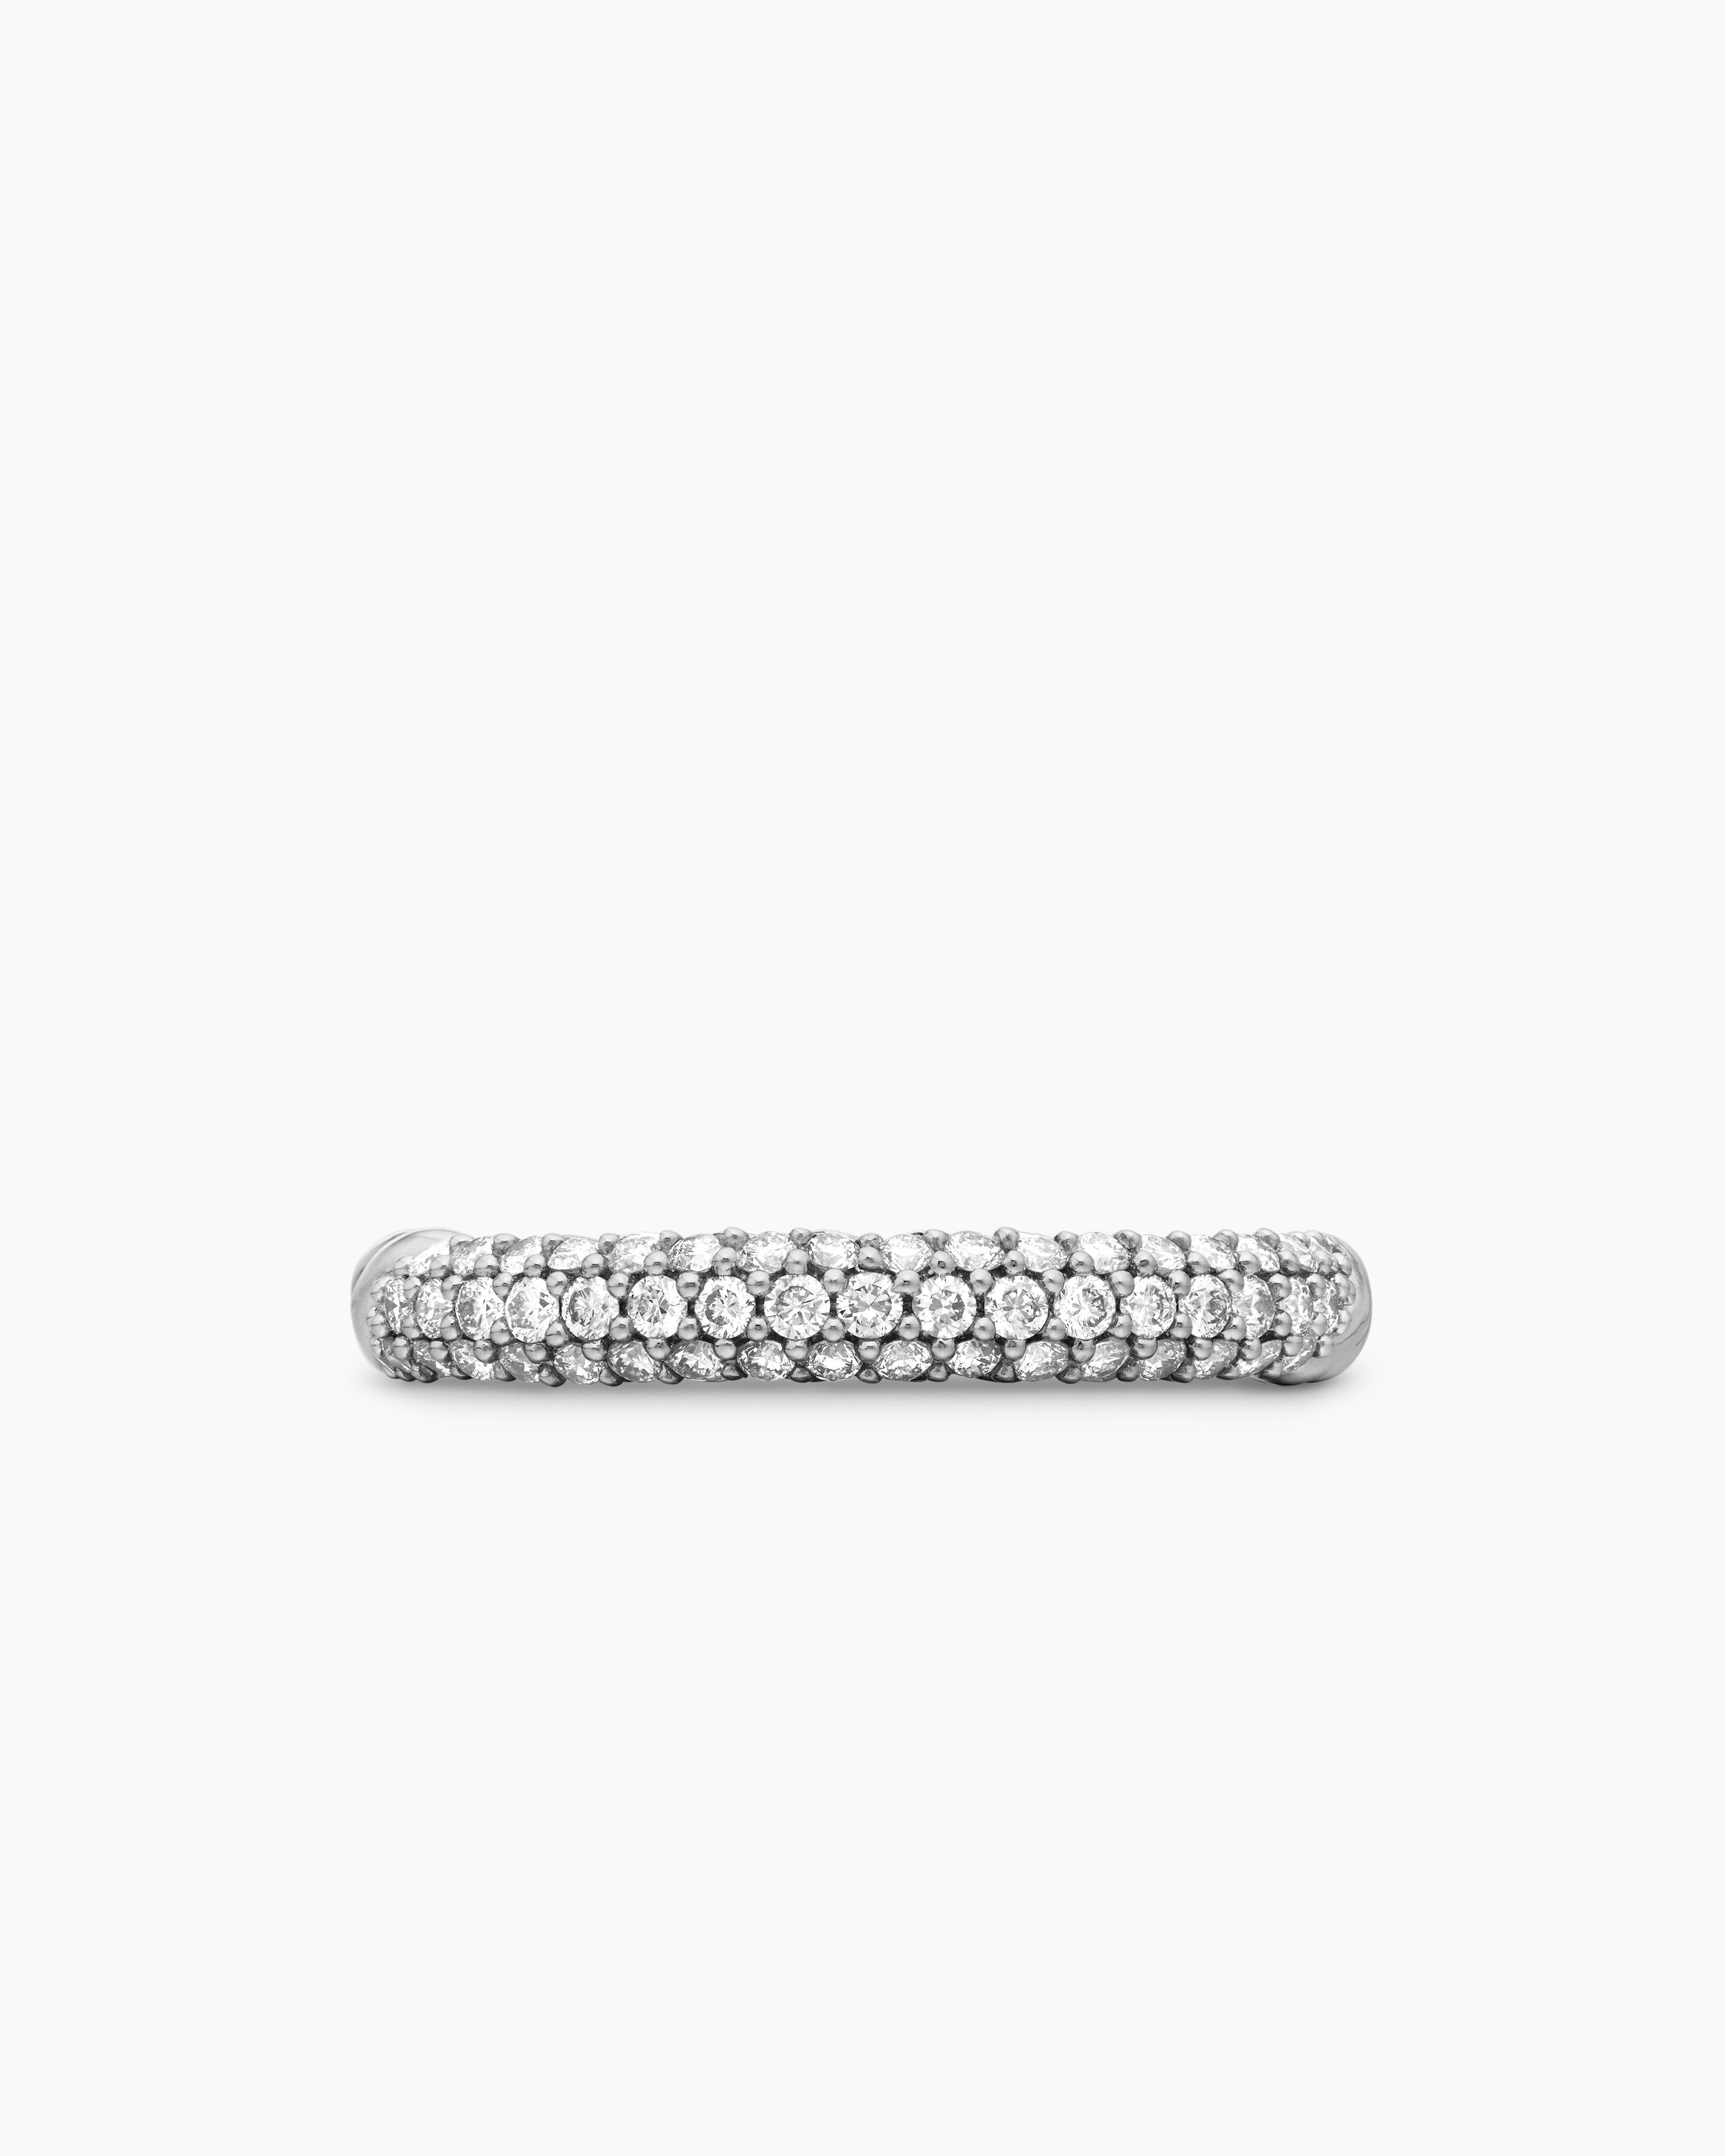 Cable Collectibles® Stack Ring in Sterling Silver, 3mm